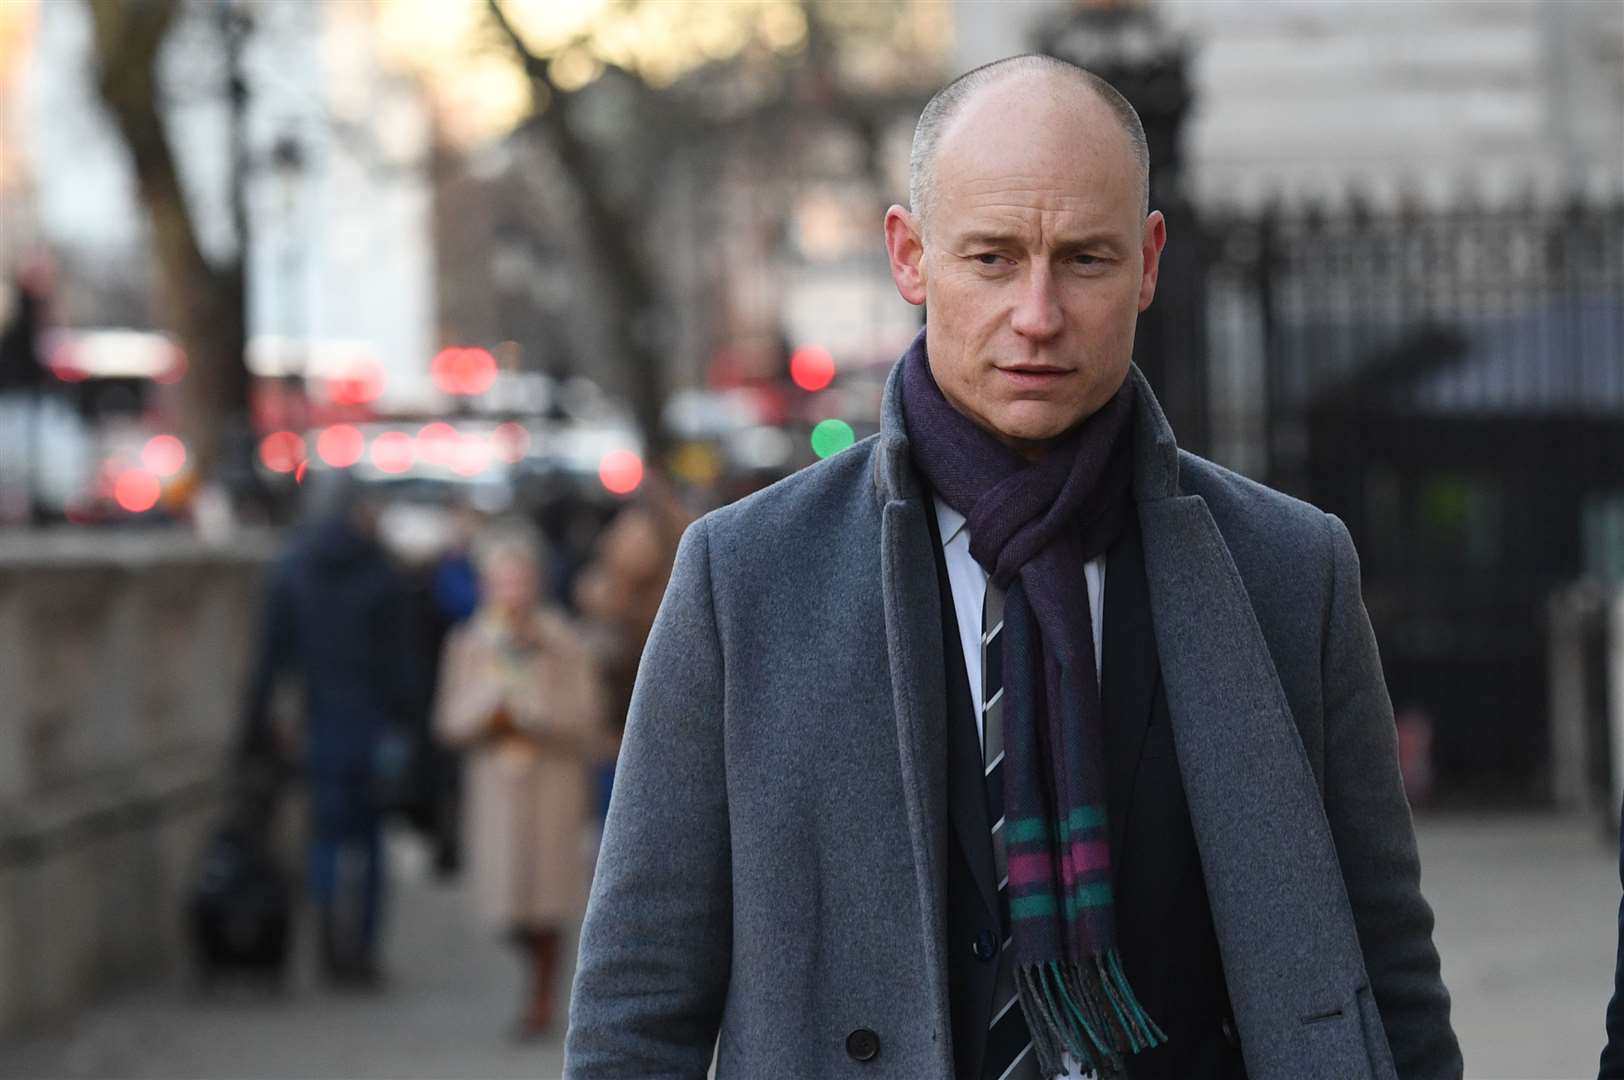 Shadow immigration minister Stephen Kinnock accused ministers of spreading ‘lies’ about Labour’s asylum record (Stefan Rousseau/PA)